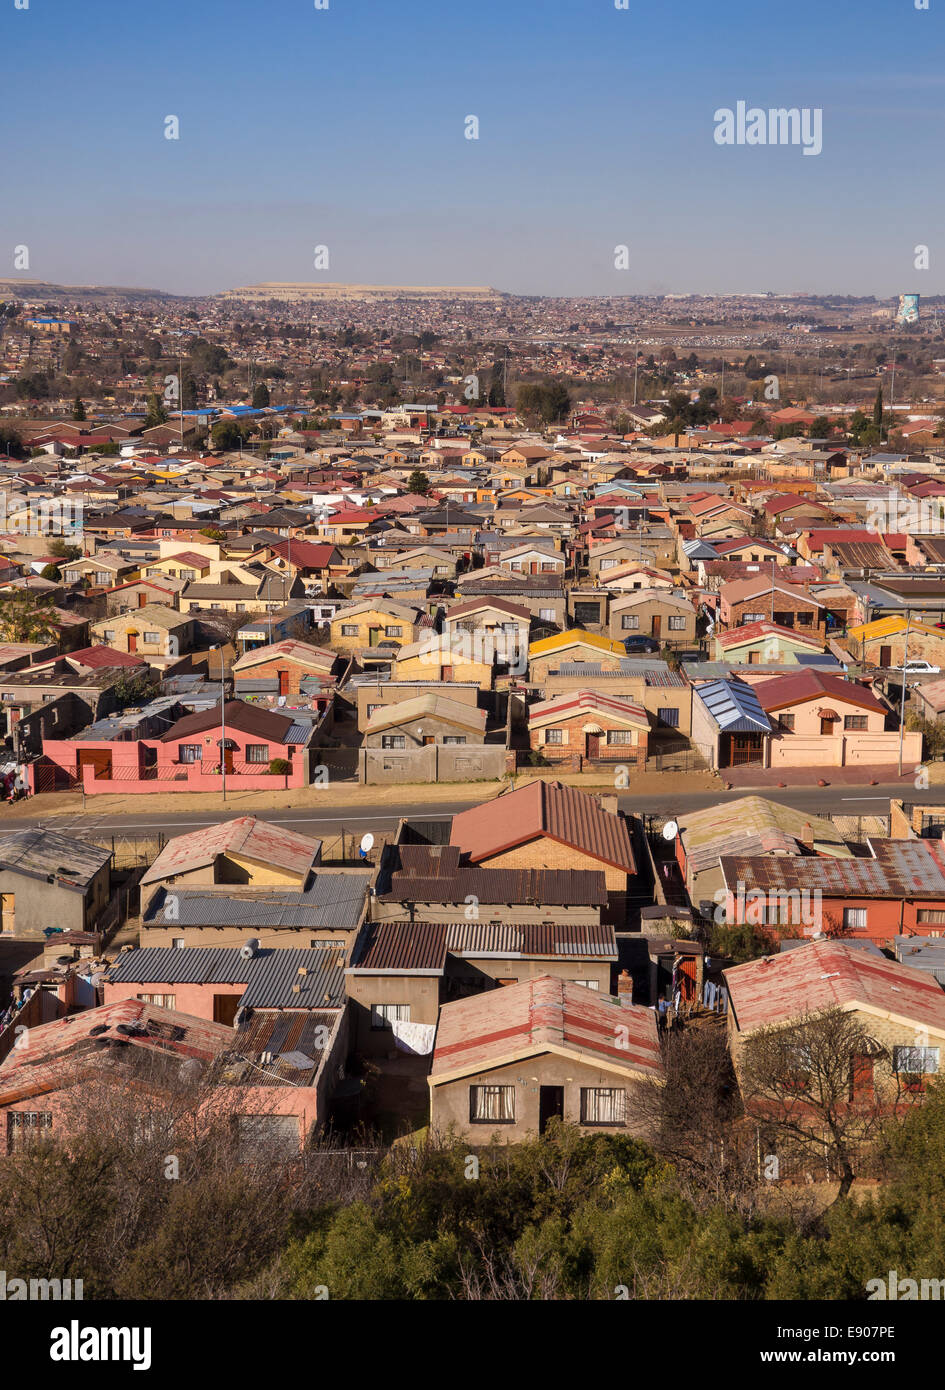 SOWETO, JOHANNESBURG, SOUTH AFRICA - View of Jabulani neighborhood in Soweto township, as seen from the Oppenheimer Tower. Stock Photo